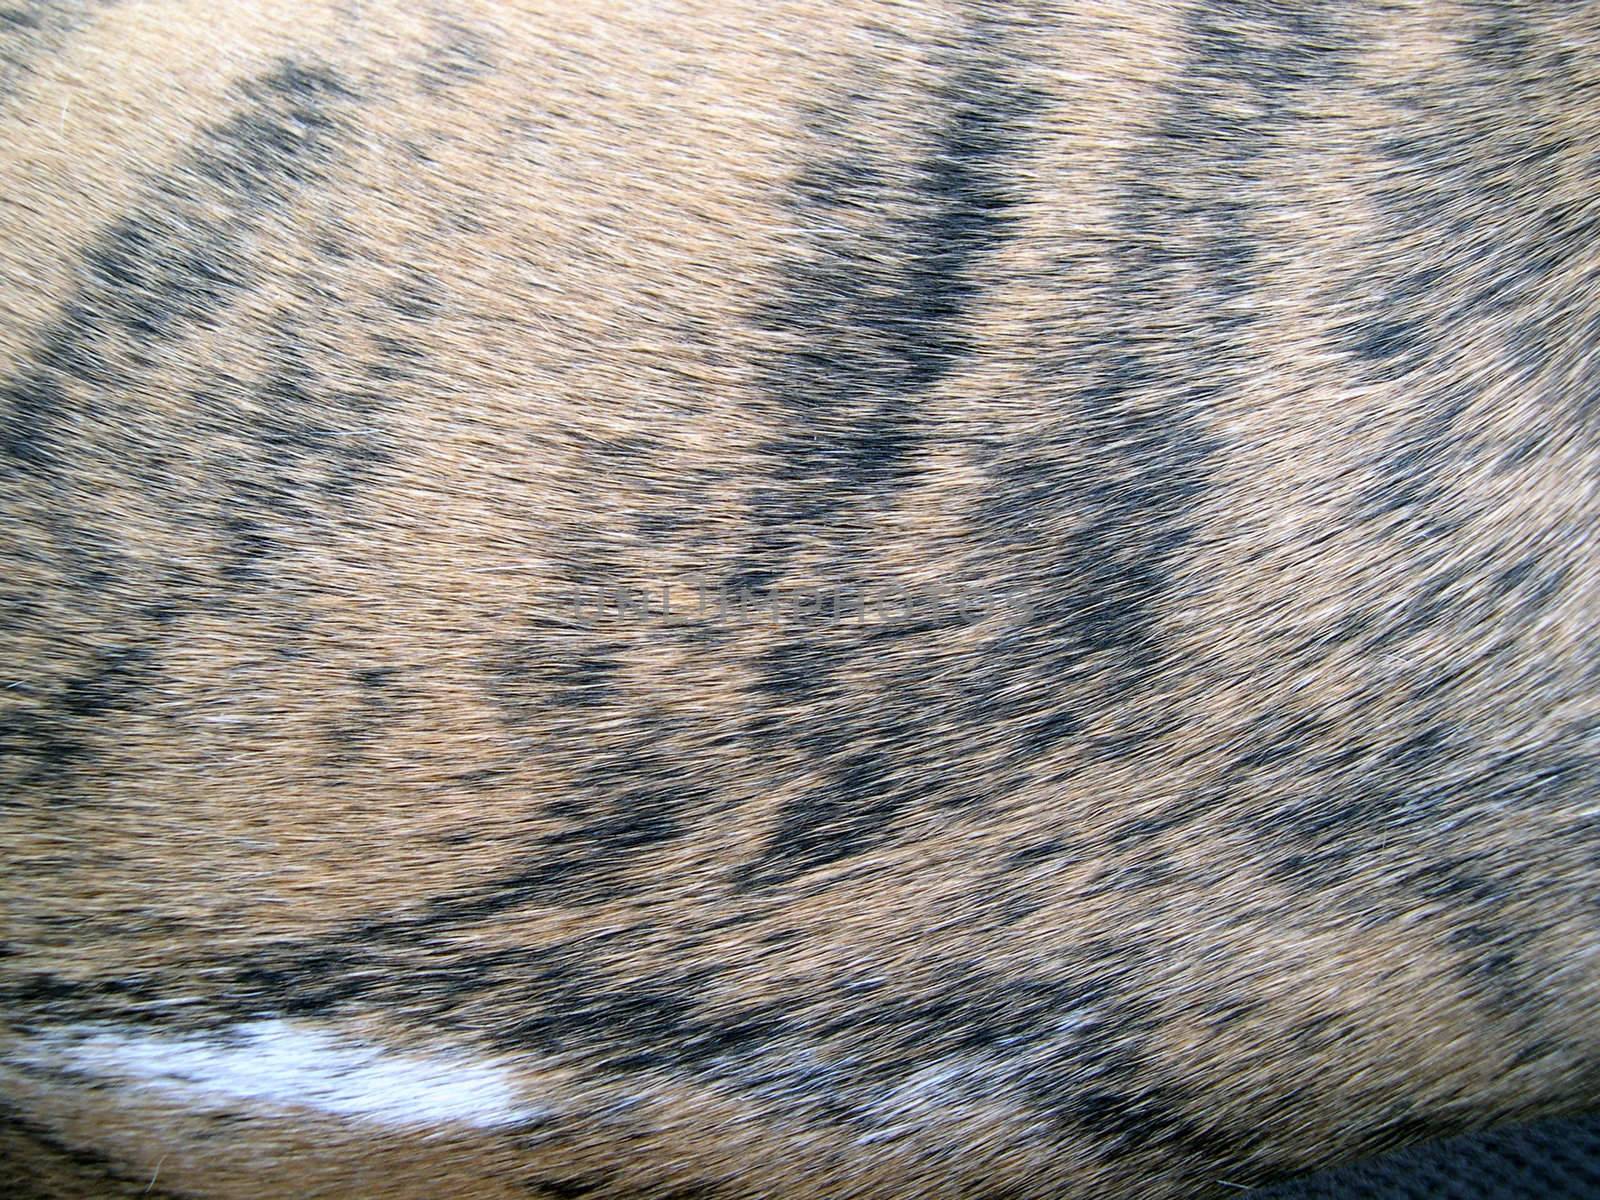 a tiger striped pattern in a dog's coat of hair